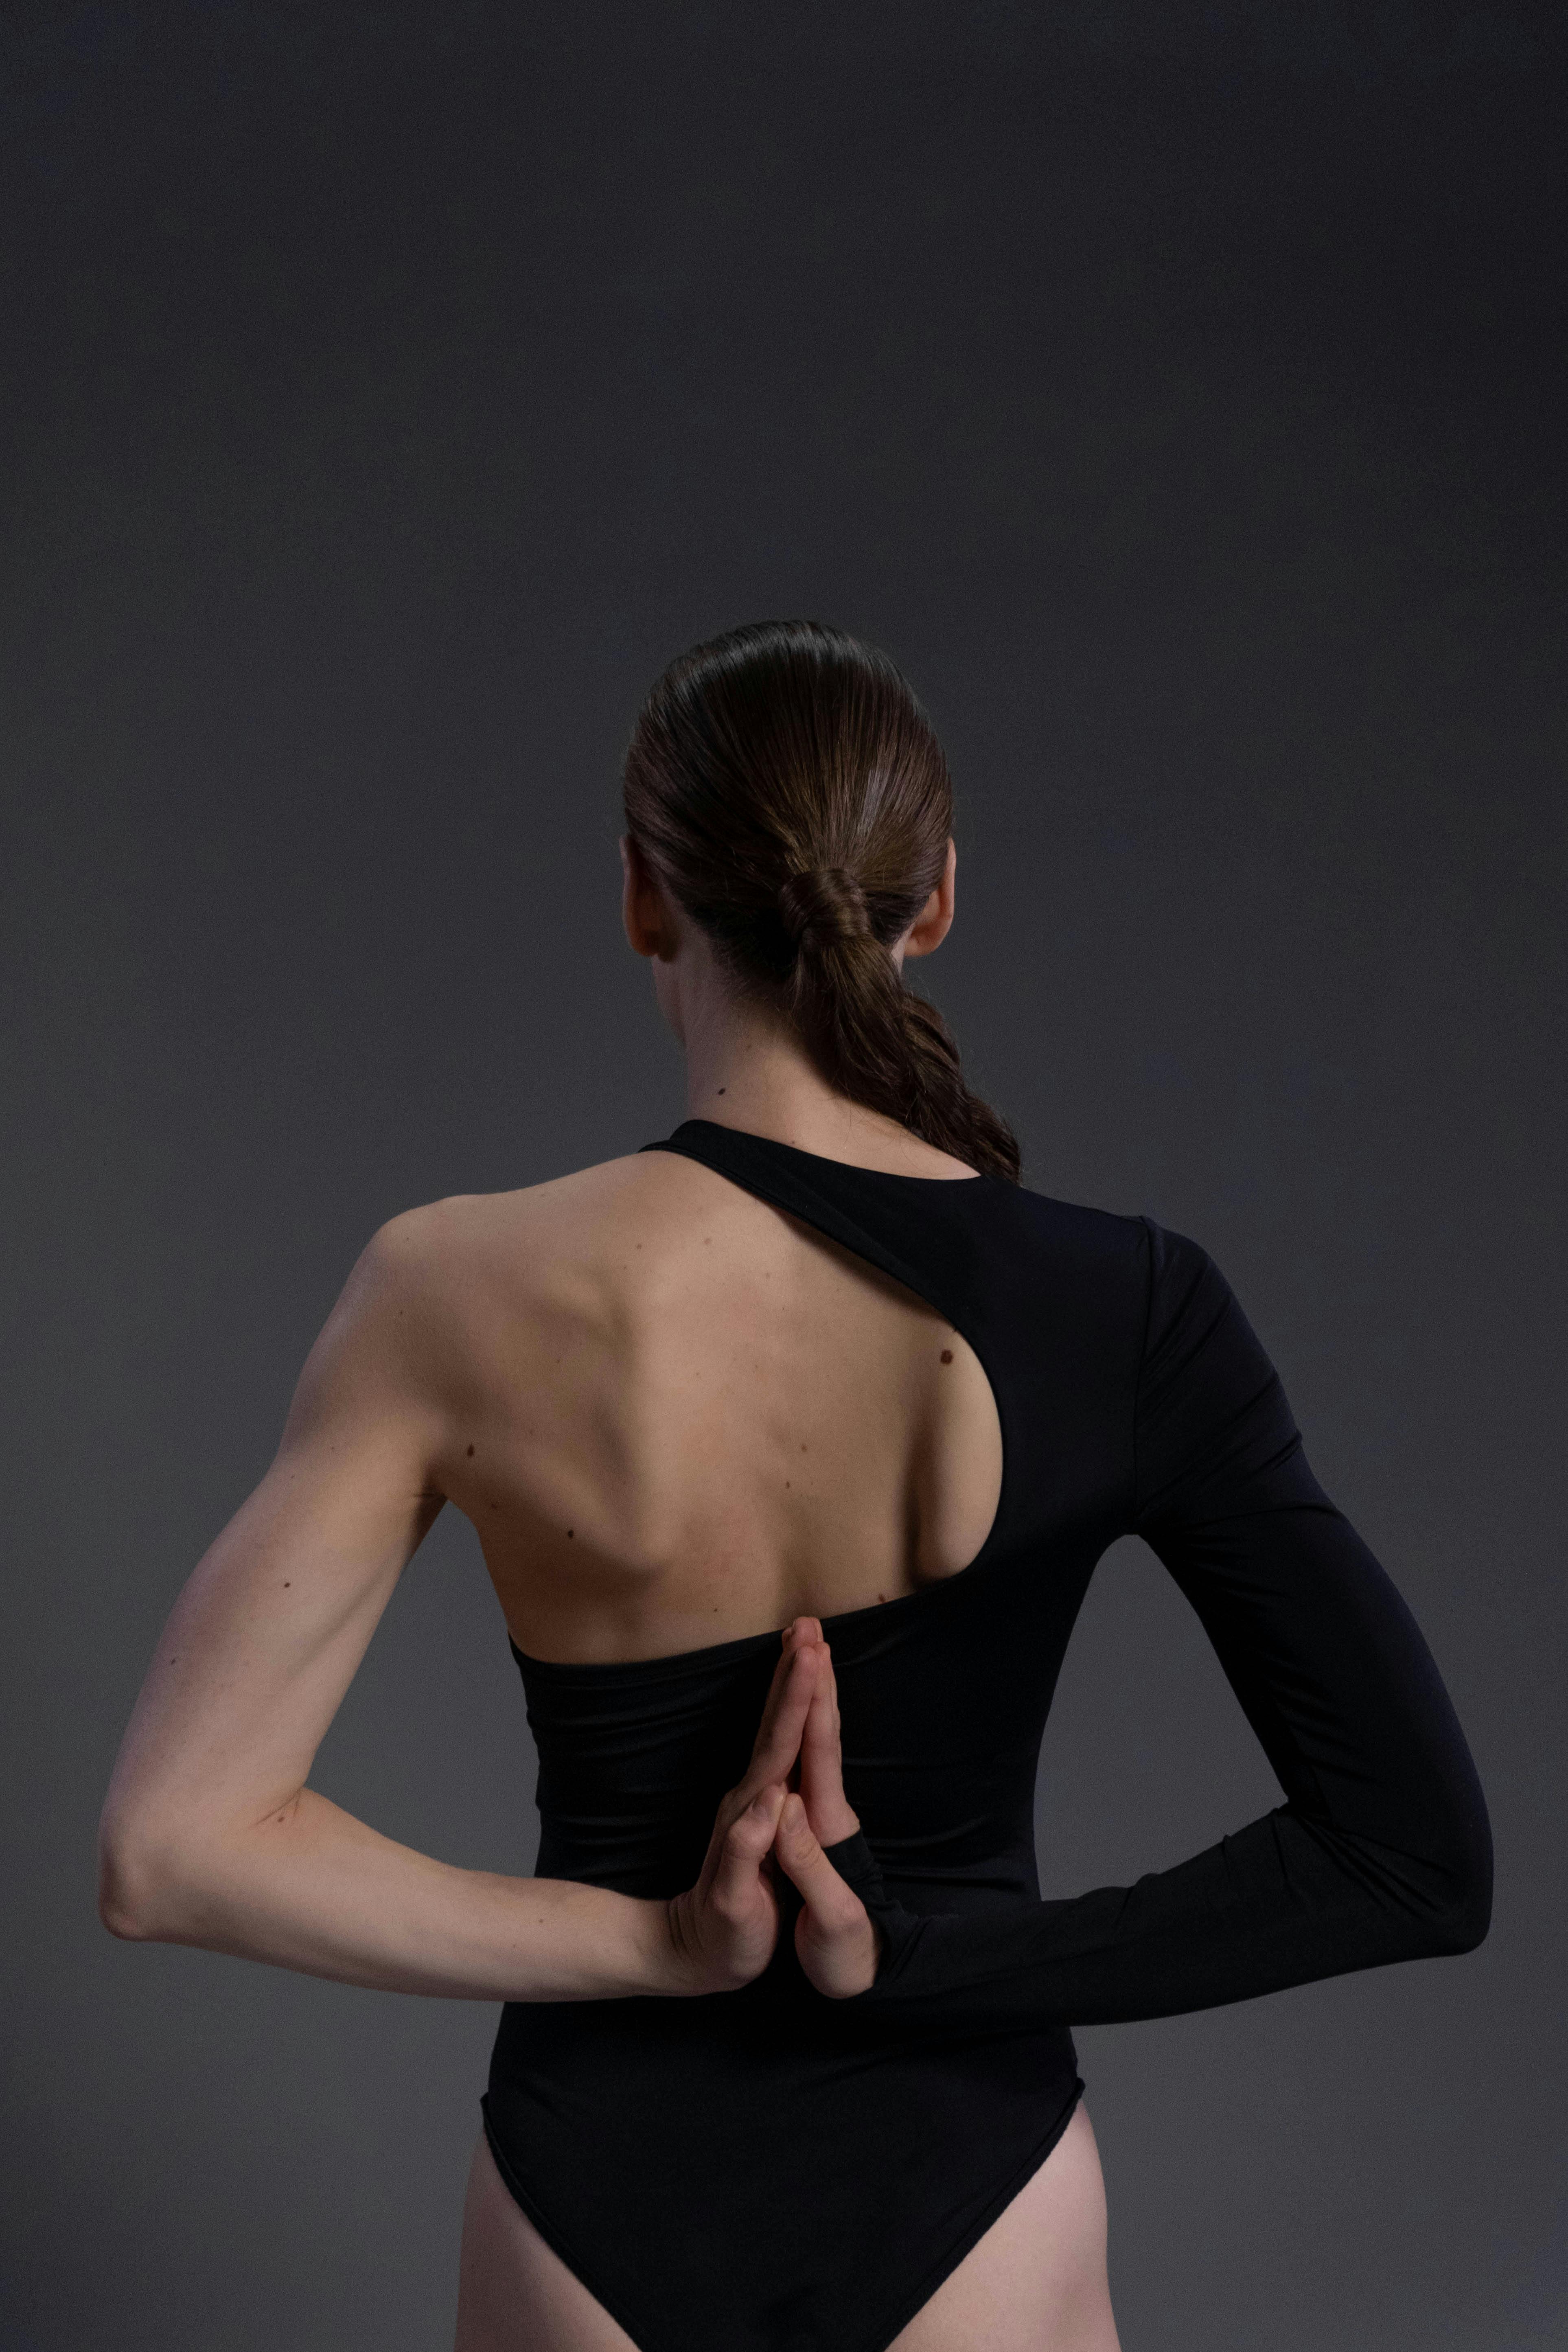 29,807 Back Arm Stretching Royalty-Free Images, Stock Photos